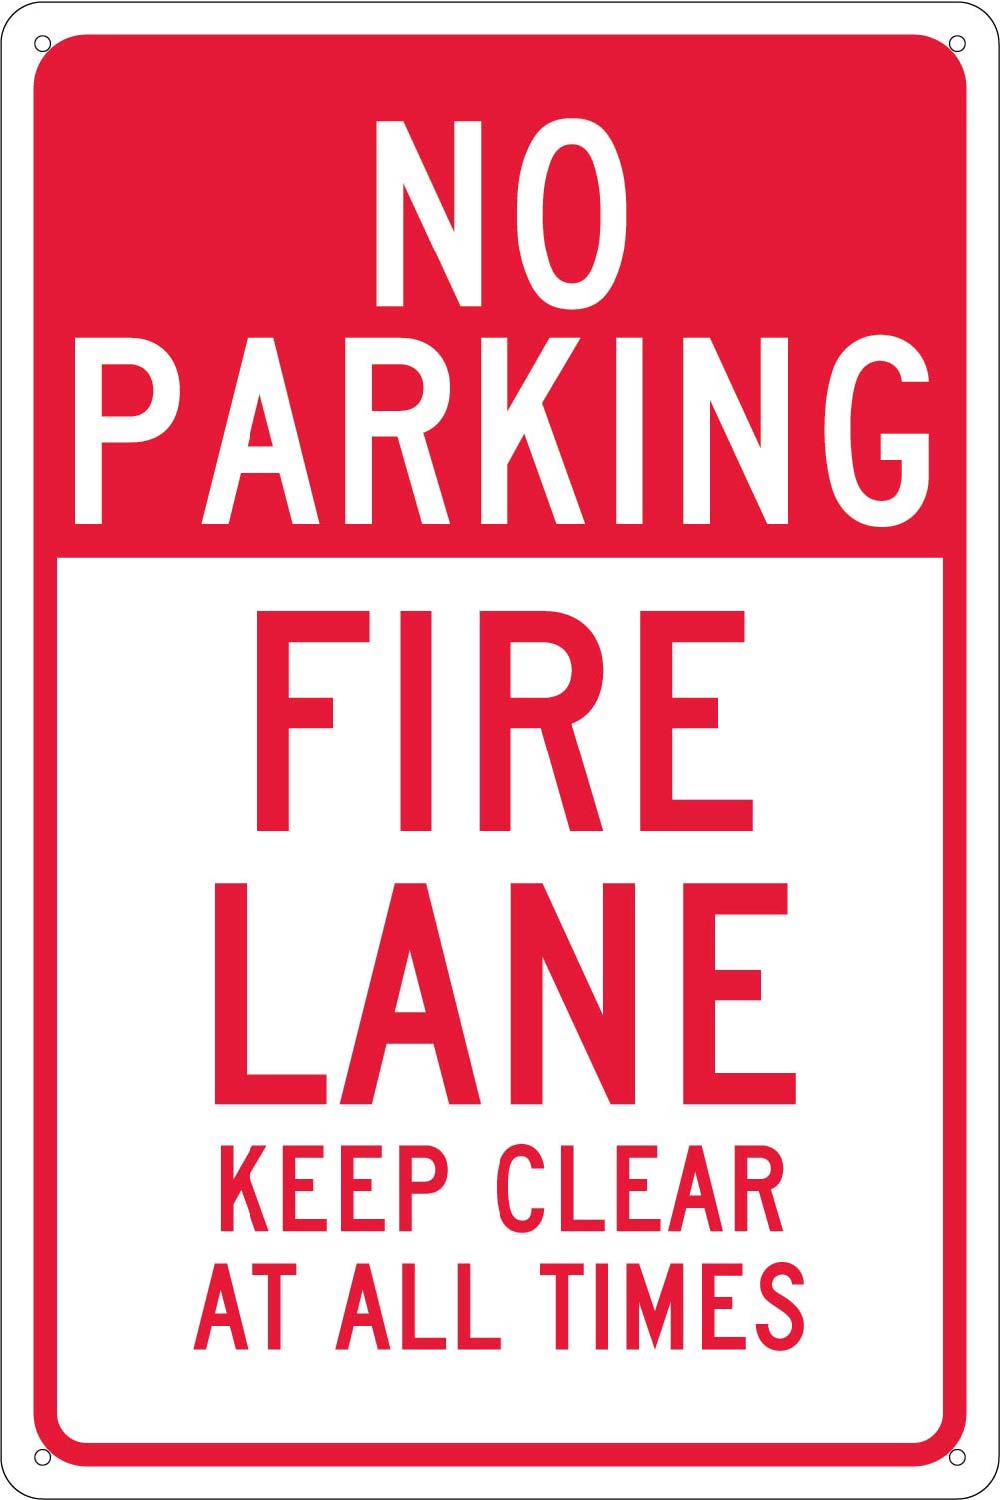 No Parking Fire Lane Keep Clear At All Times Sign-eSafety Supplies, Inc